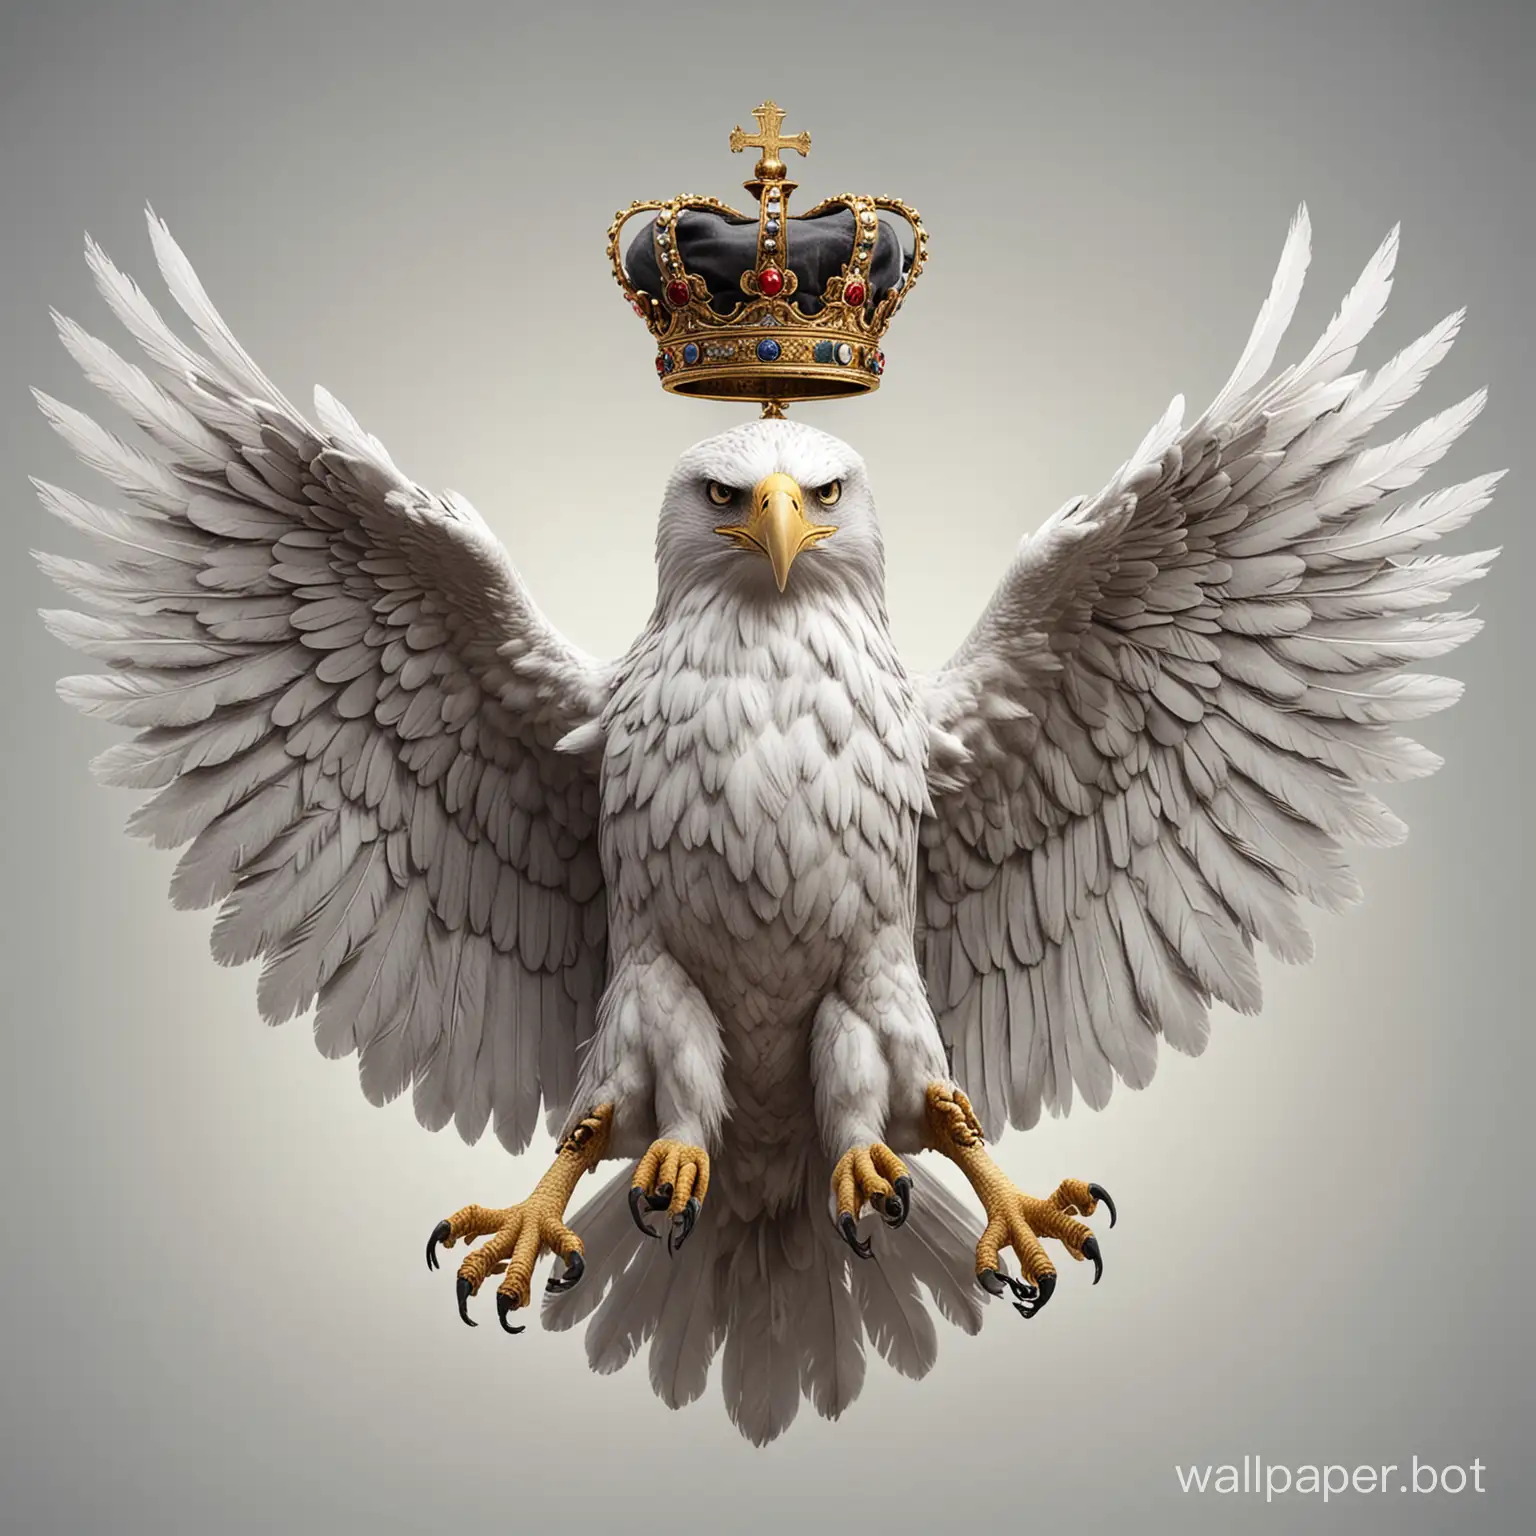 soaring two-headed white-headed eagle
in crowns